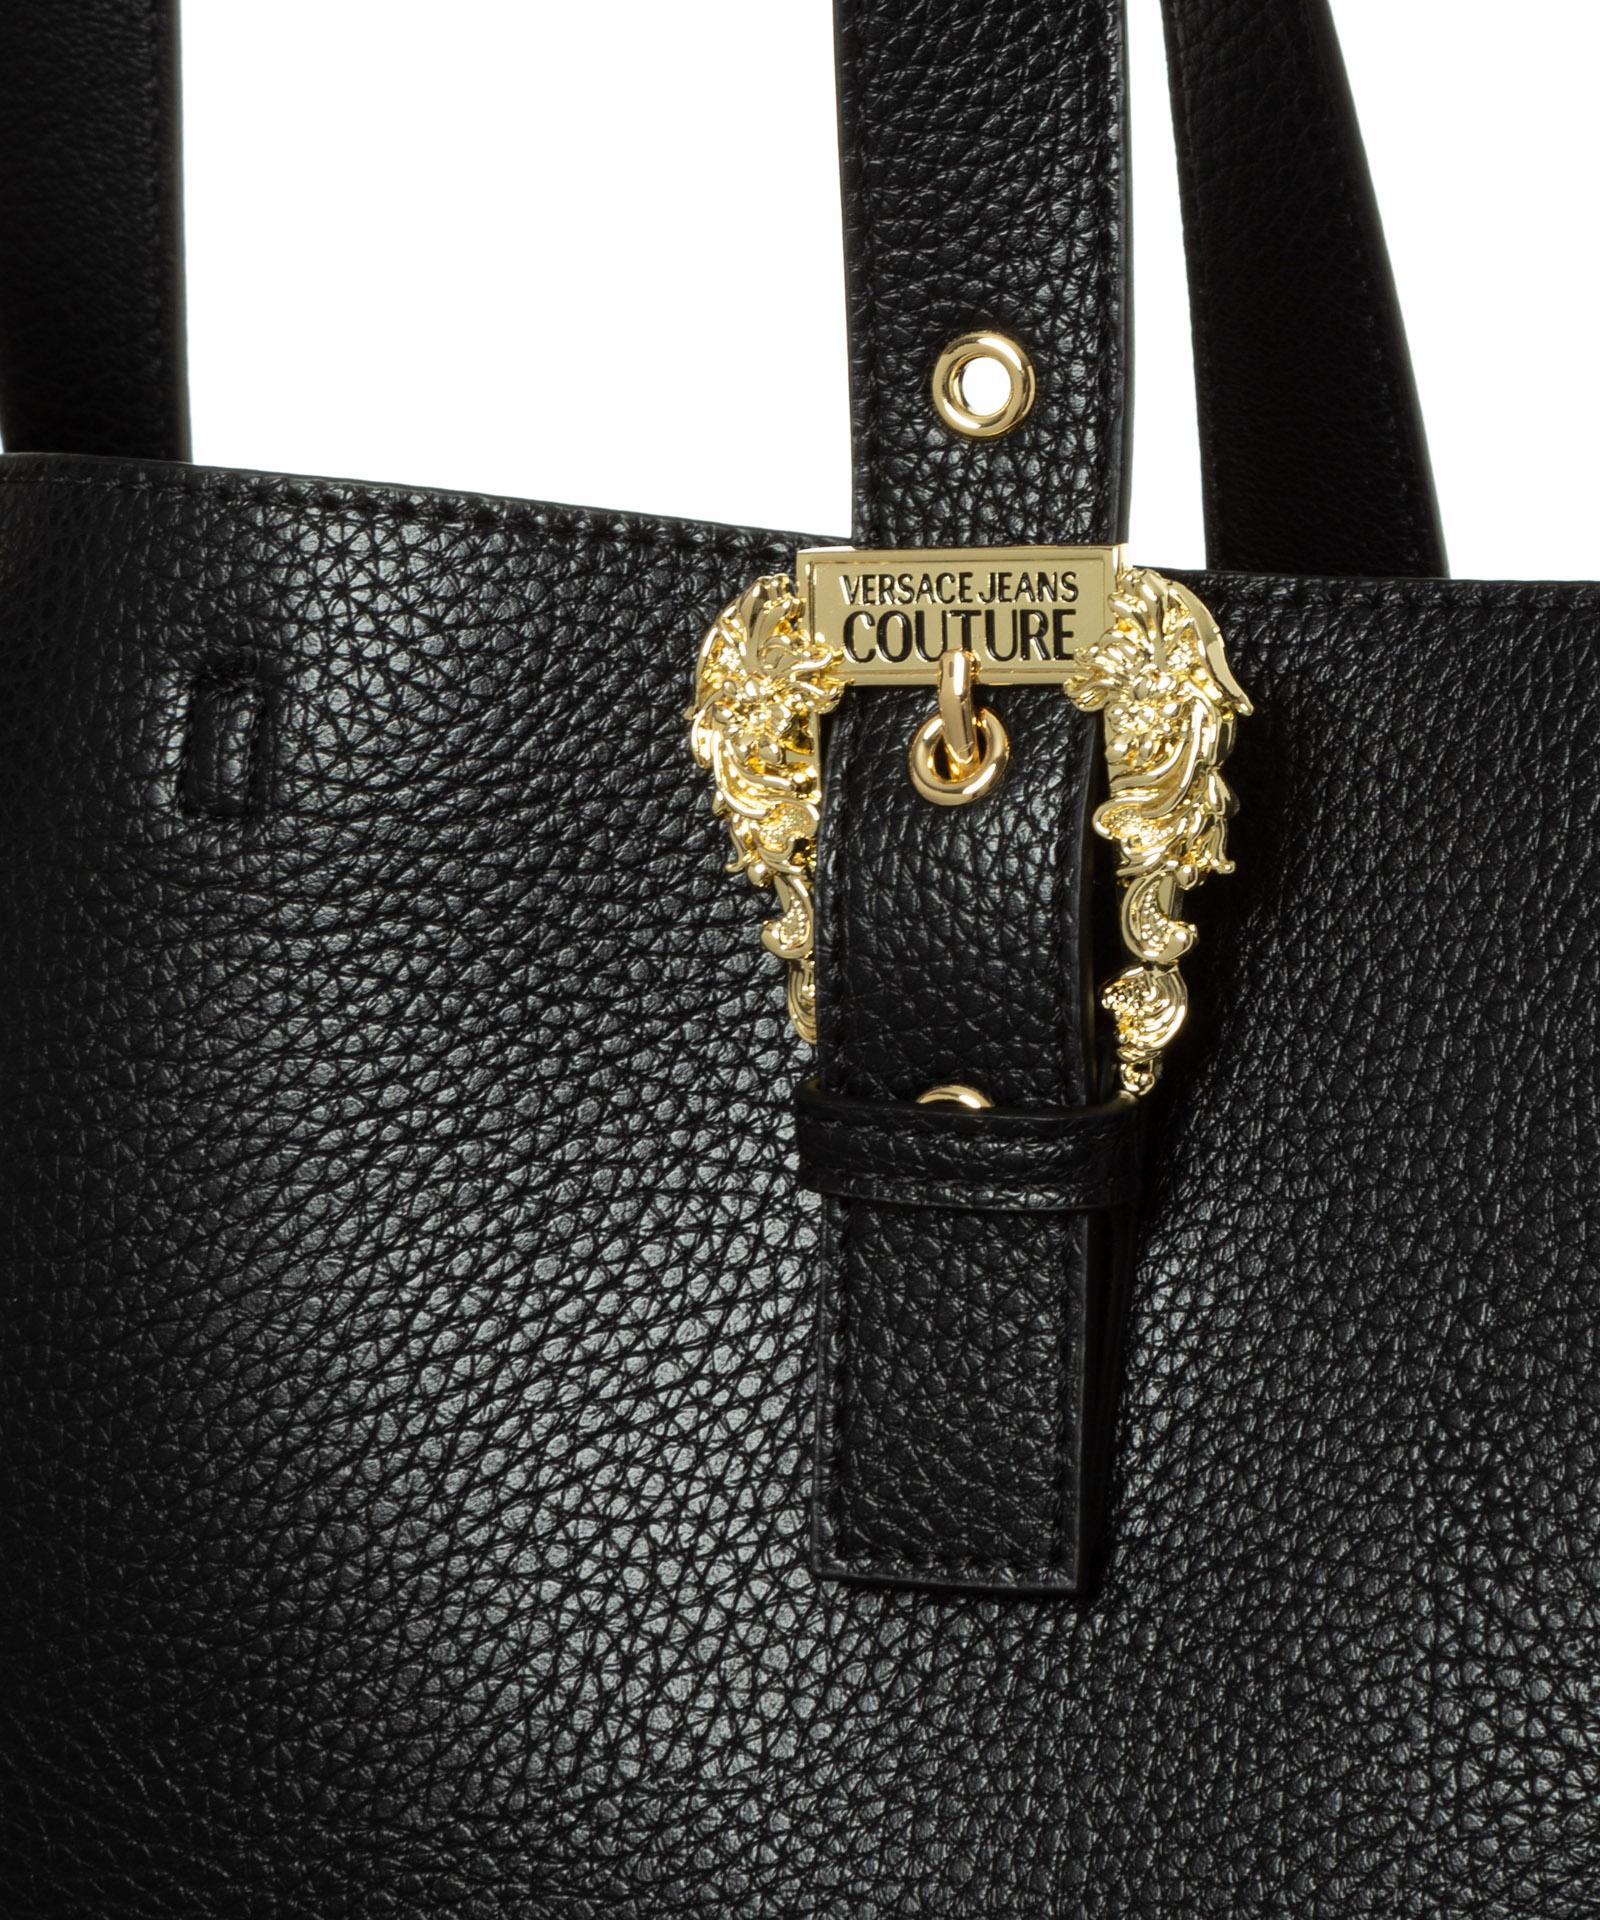 Versace Couture I Tote Bag in Black | Lyst